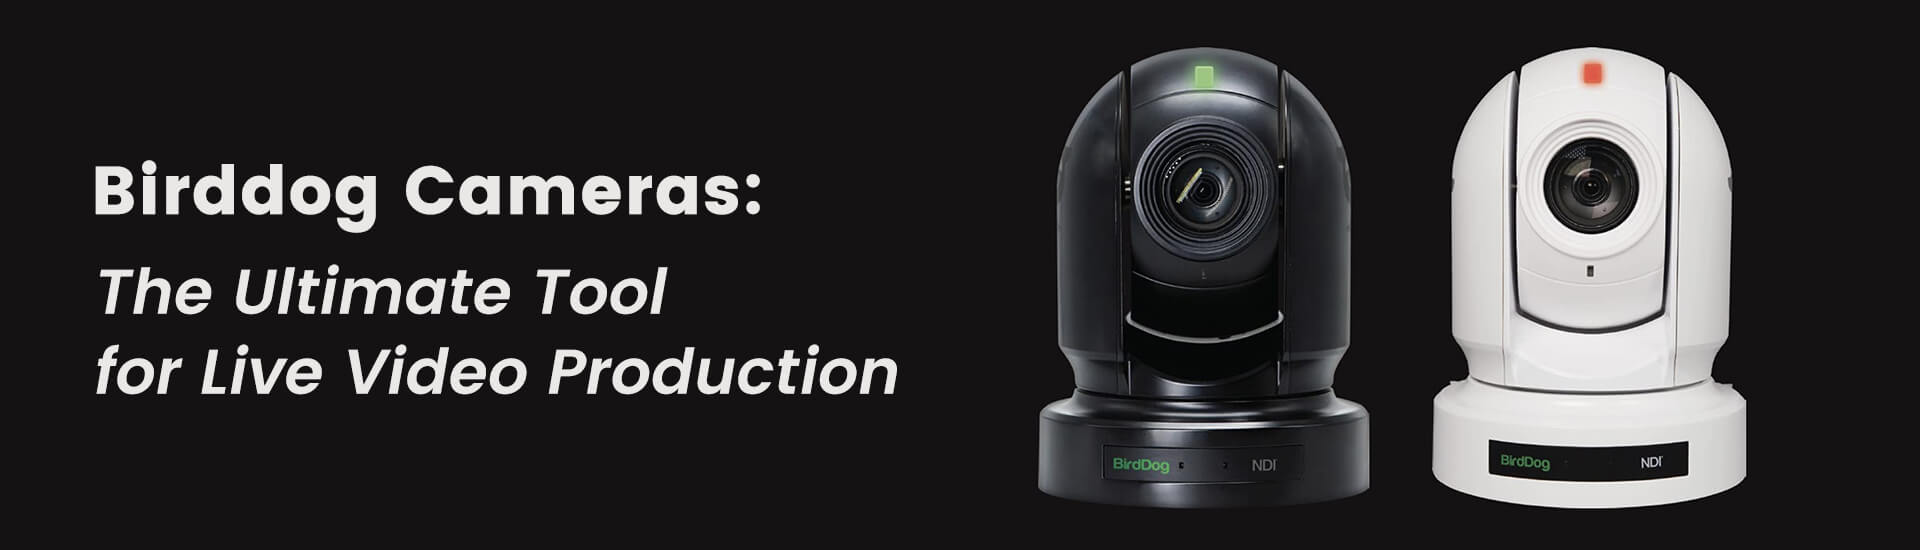 Birddog Cameras: The Ultimate Tool for Live Video Production